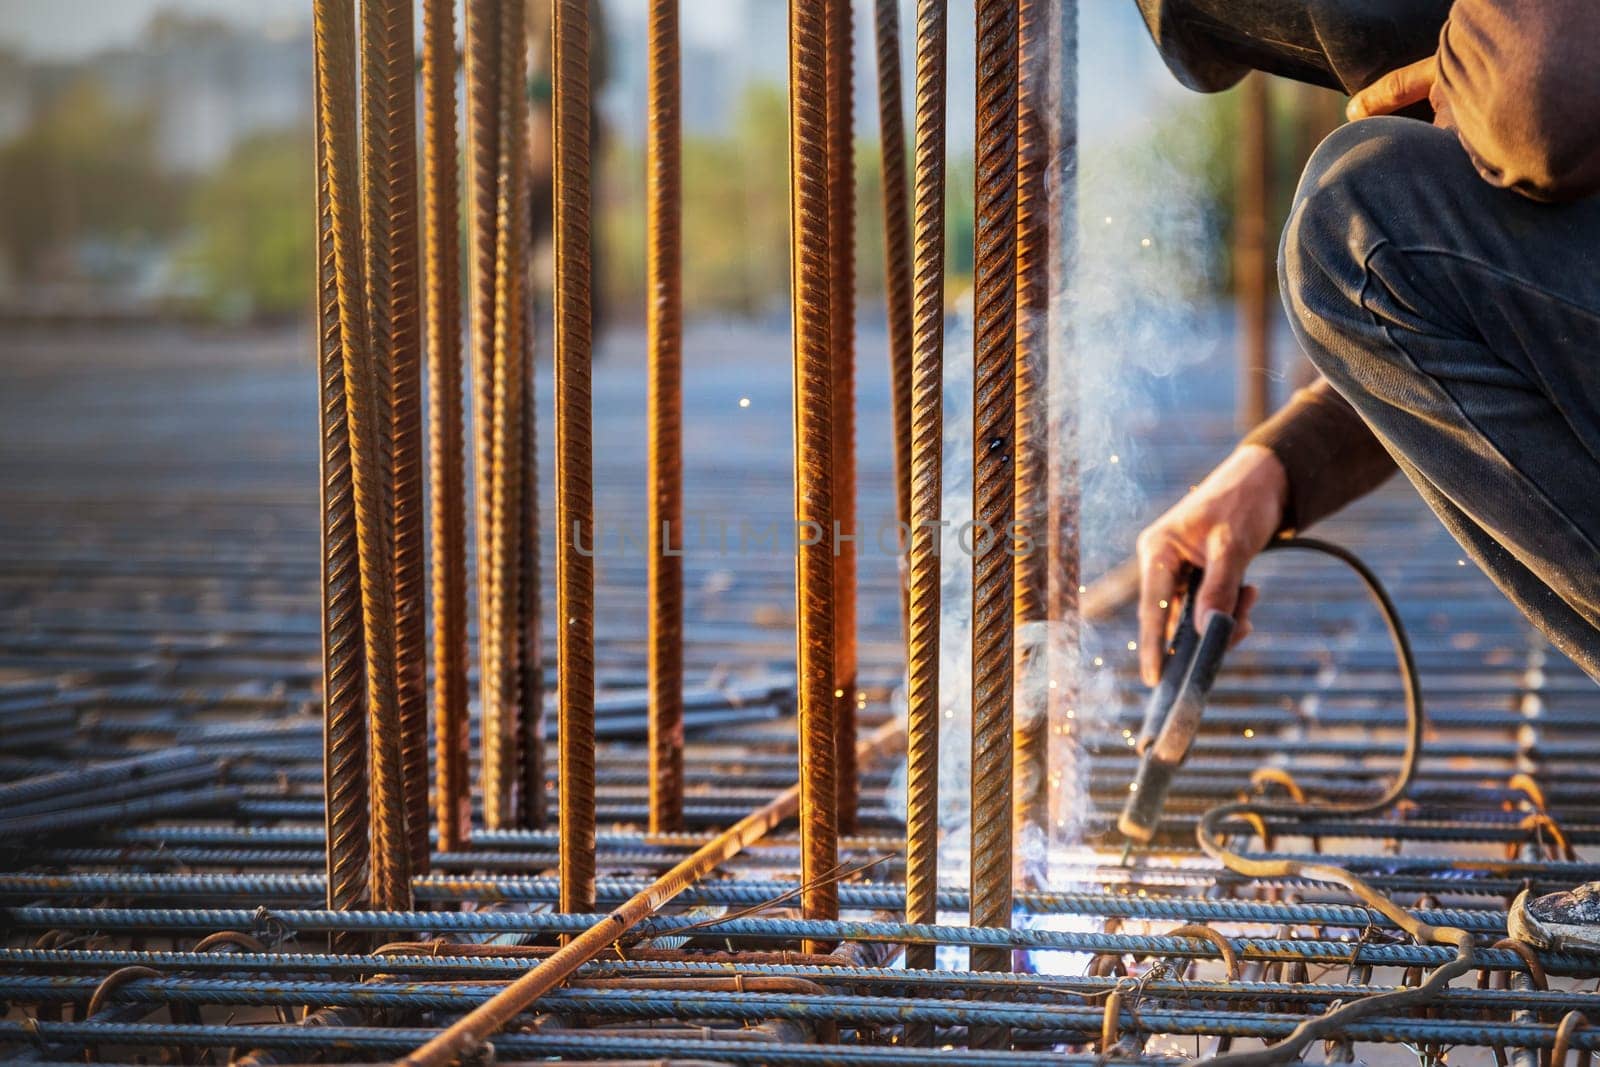 A welder welds a steel frame from reinforcement for reinforced concrete structures at a construction site by Rom4ek